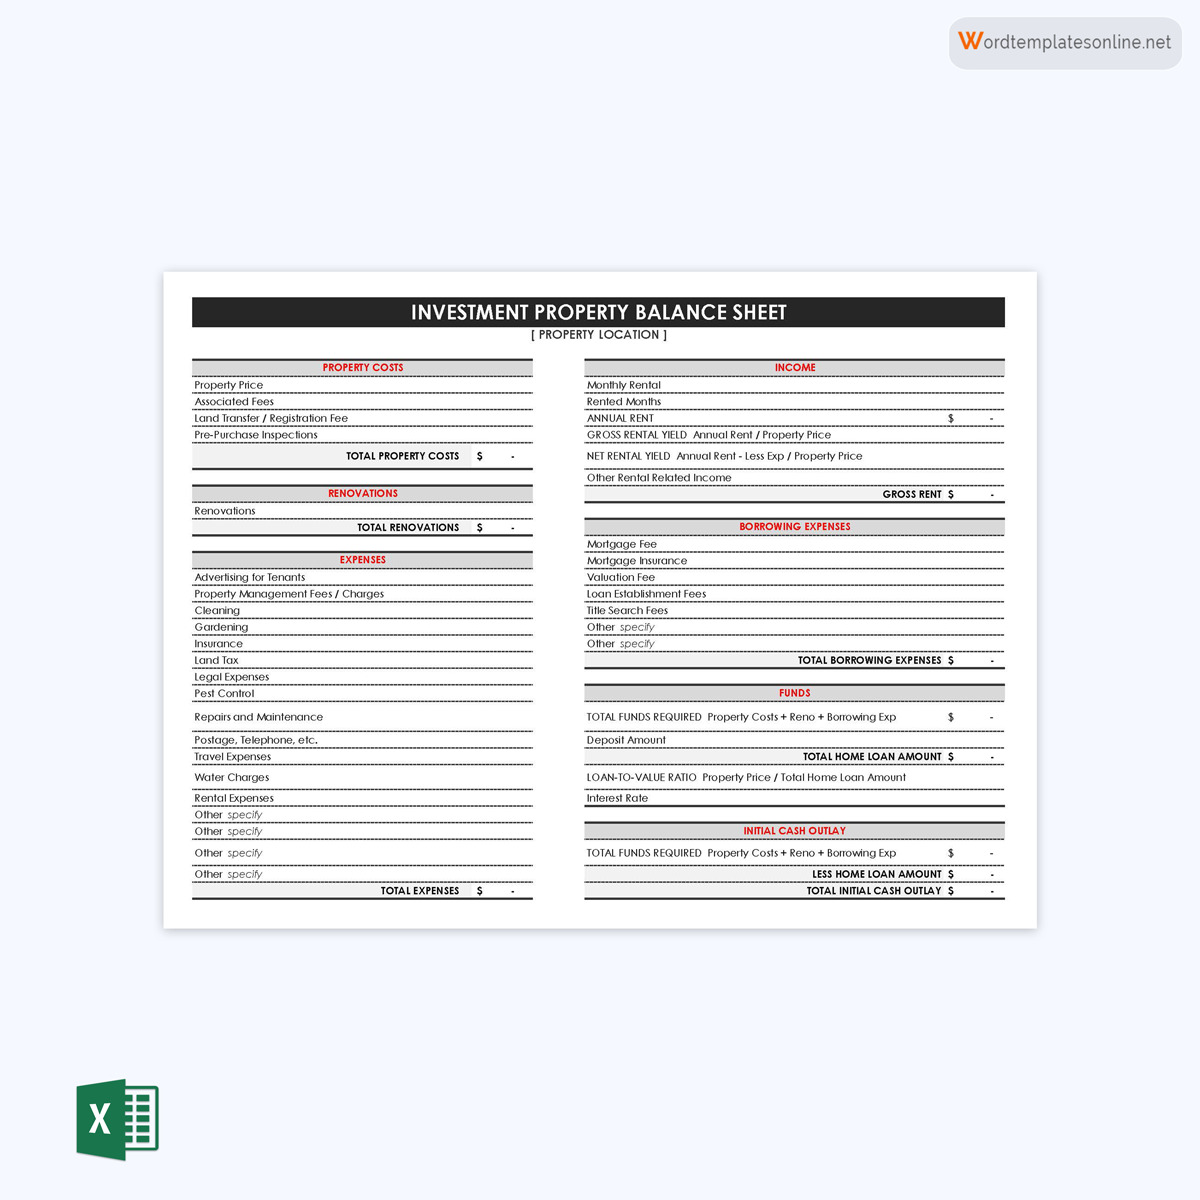 Free Editable Investment Property Balance Sheet Template 01 as Excel Sheet